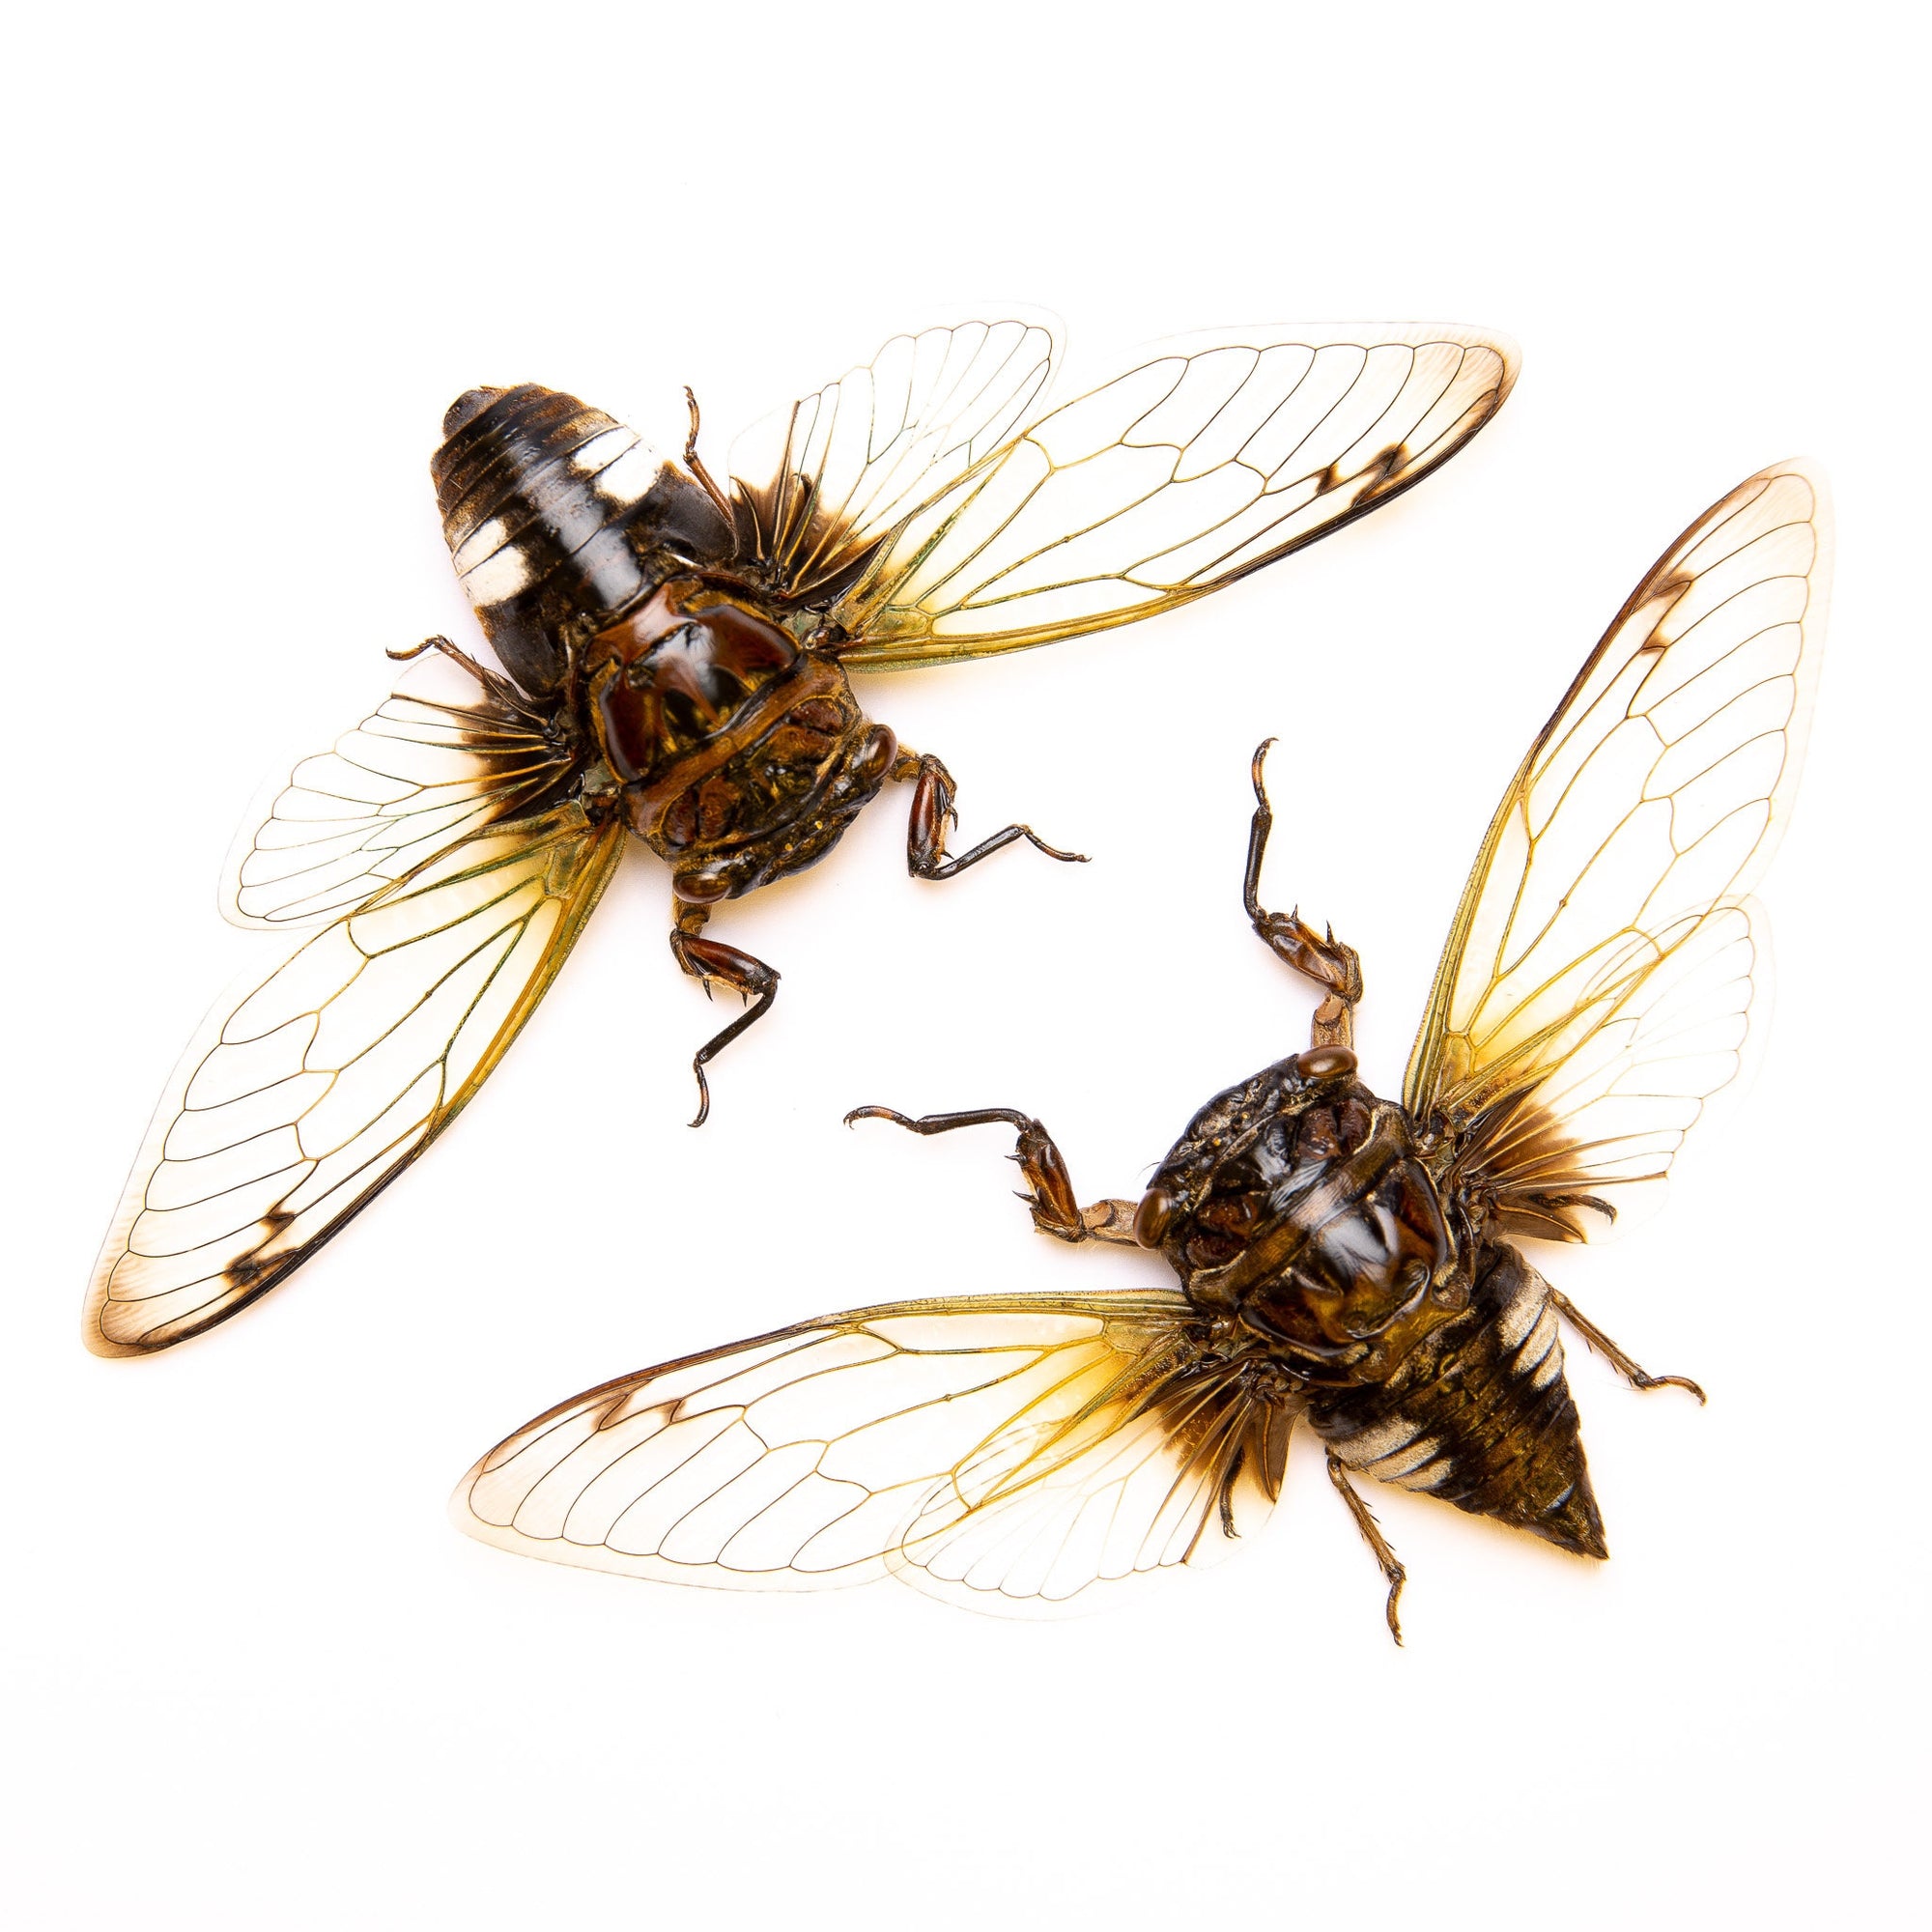 TWO (2) CLEAR-WING Cicadas (Cryptotympana acuta) Large Wingspan 4.5 Inches A1 Real Natural Specimens